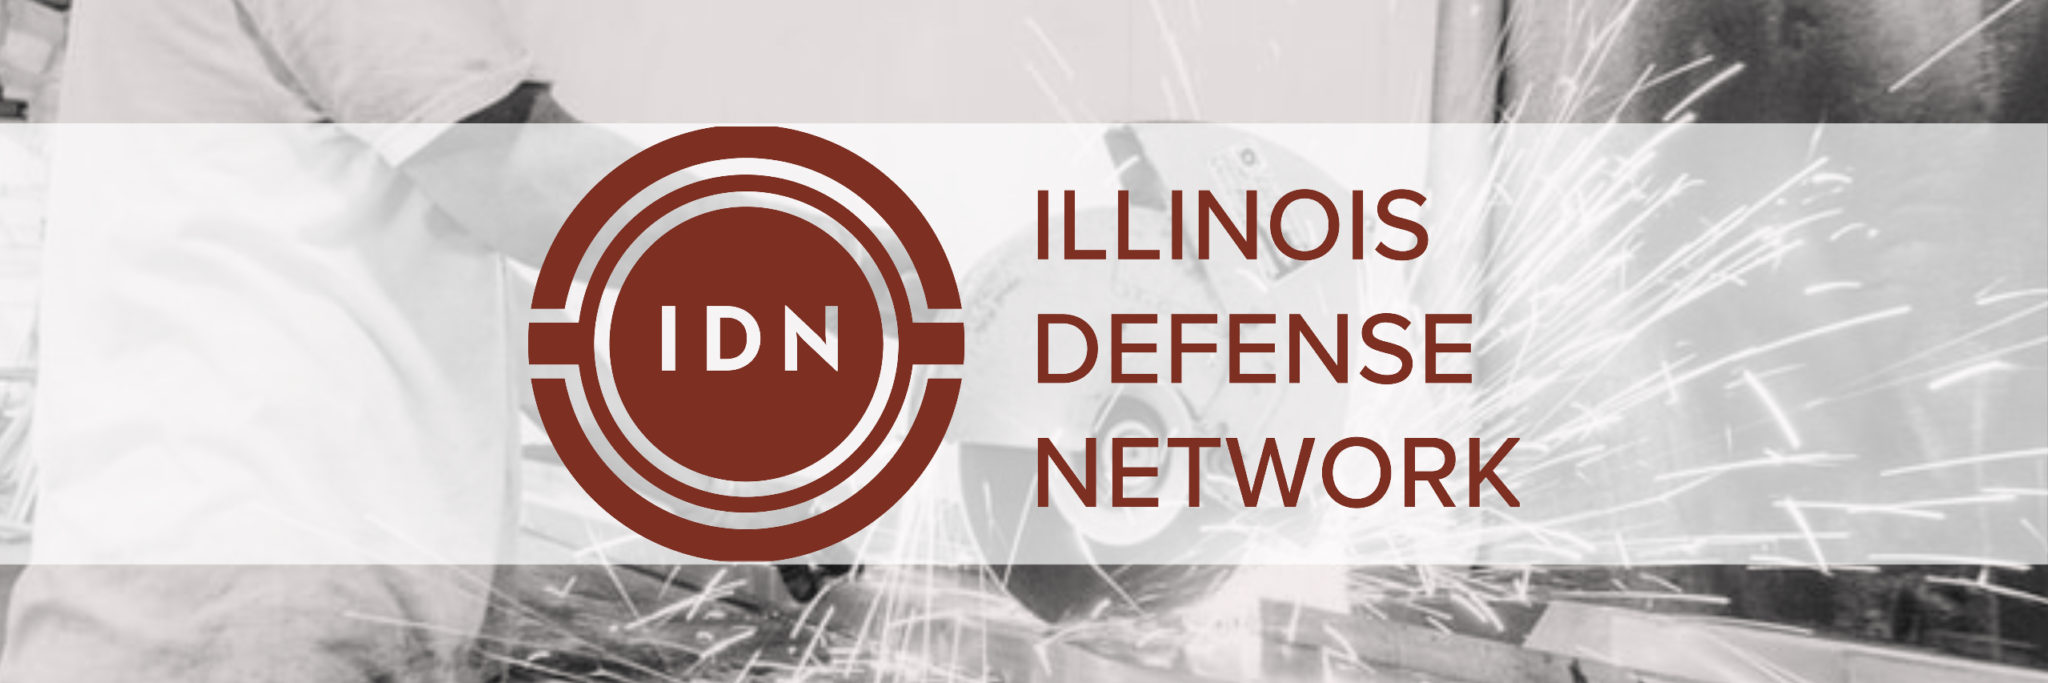 Illinois Defense Network To Receive CARES Funds